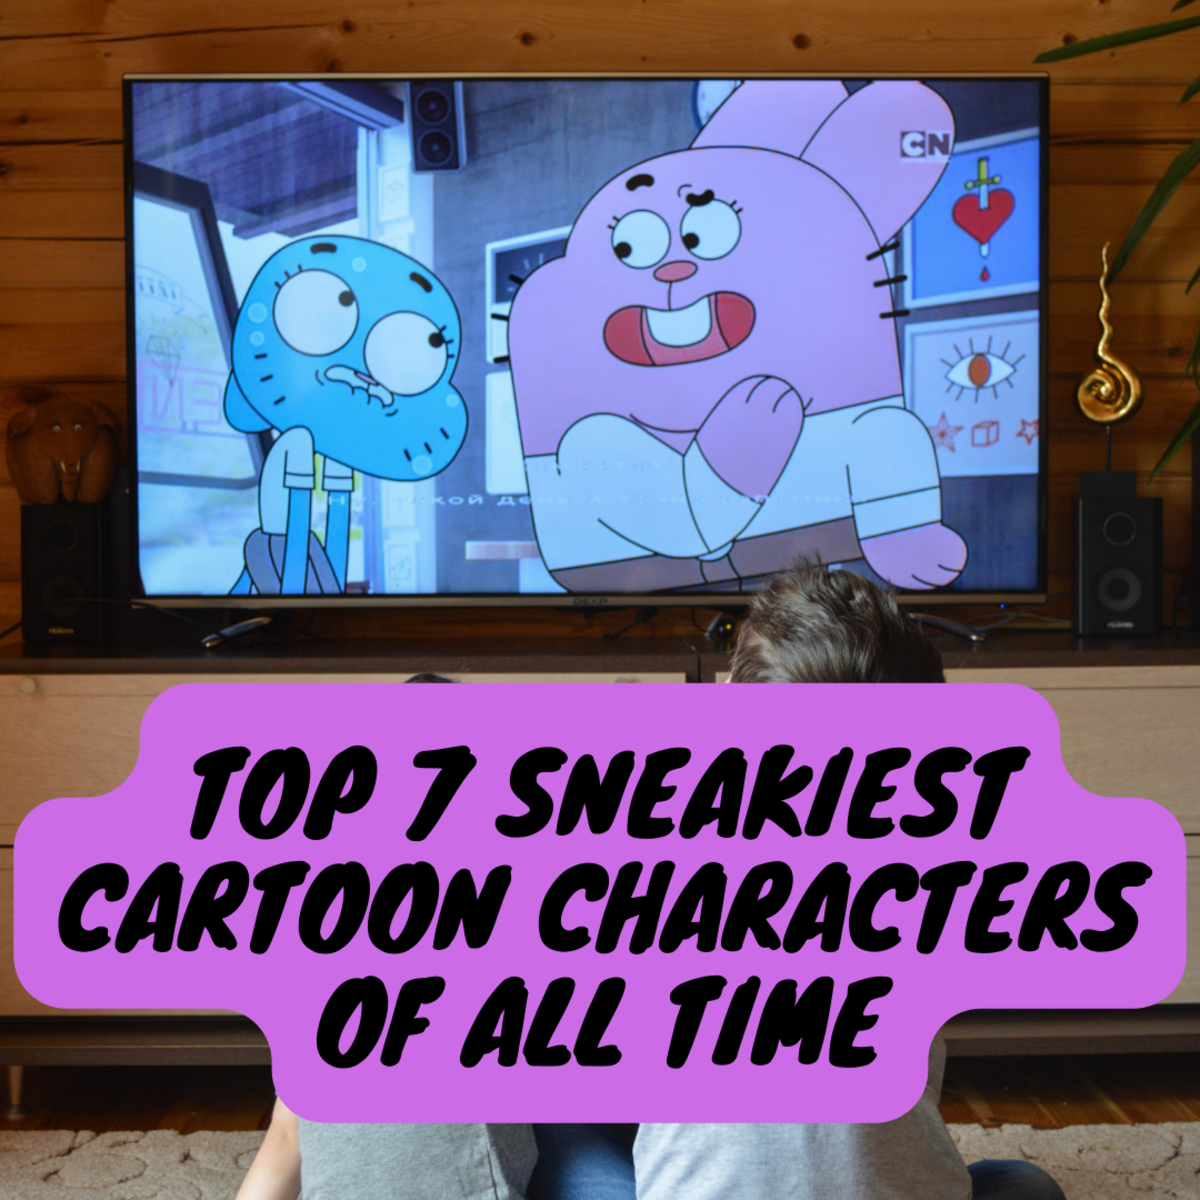 Every cartoon has at least one character who is shrewd and sneaky. Here we talk about seven of the sneakiest cartoon characters that can probably get away with anything. 